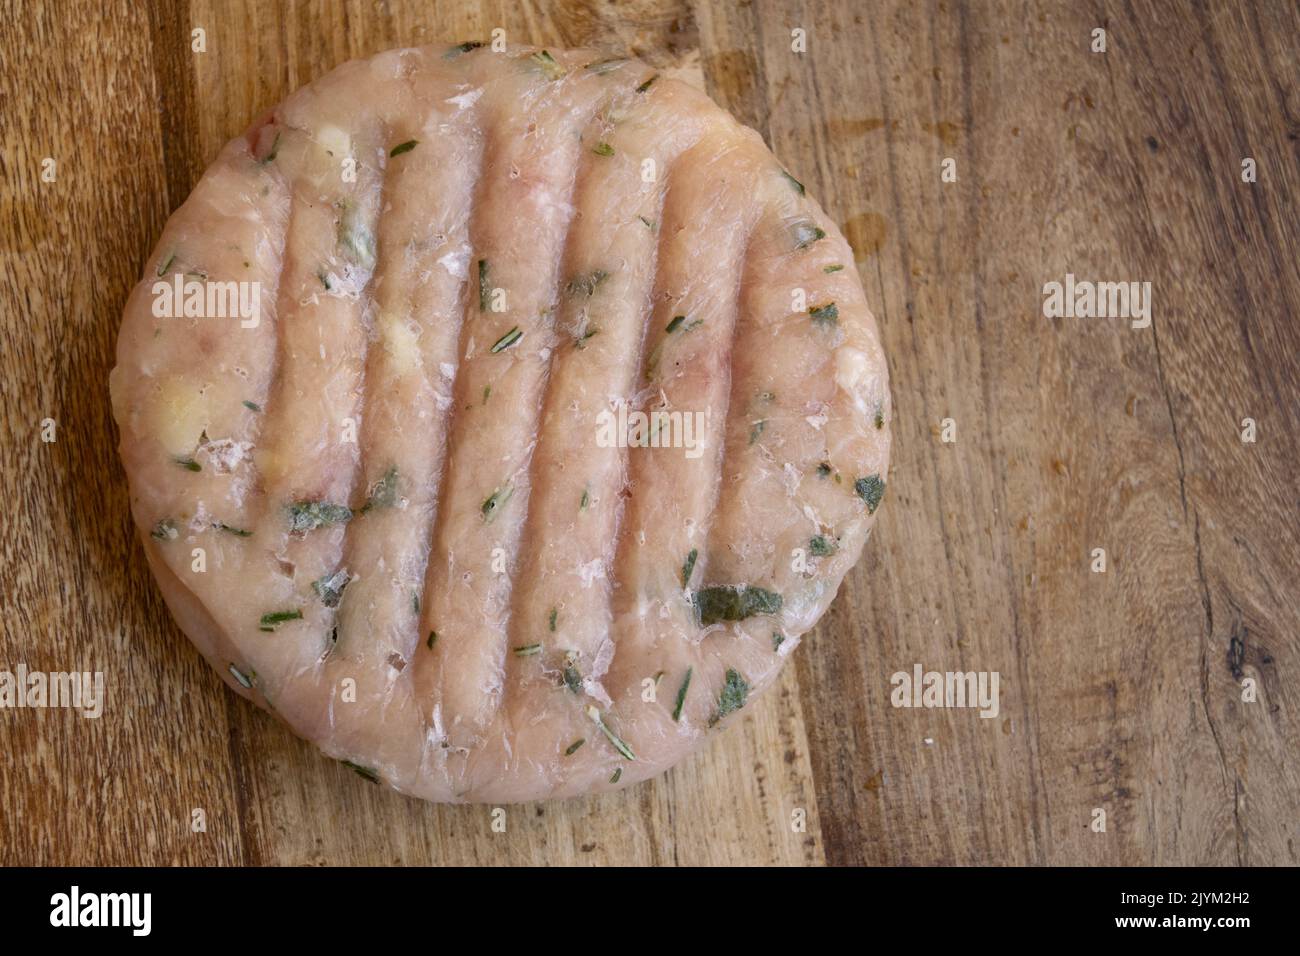 frozen chicken hamburger made at home flavored with herbs Stock Photo